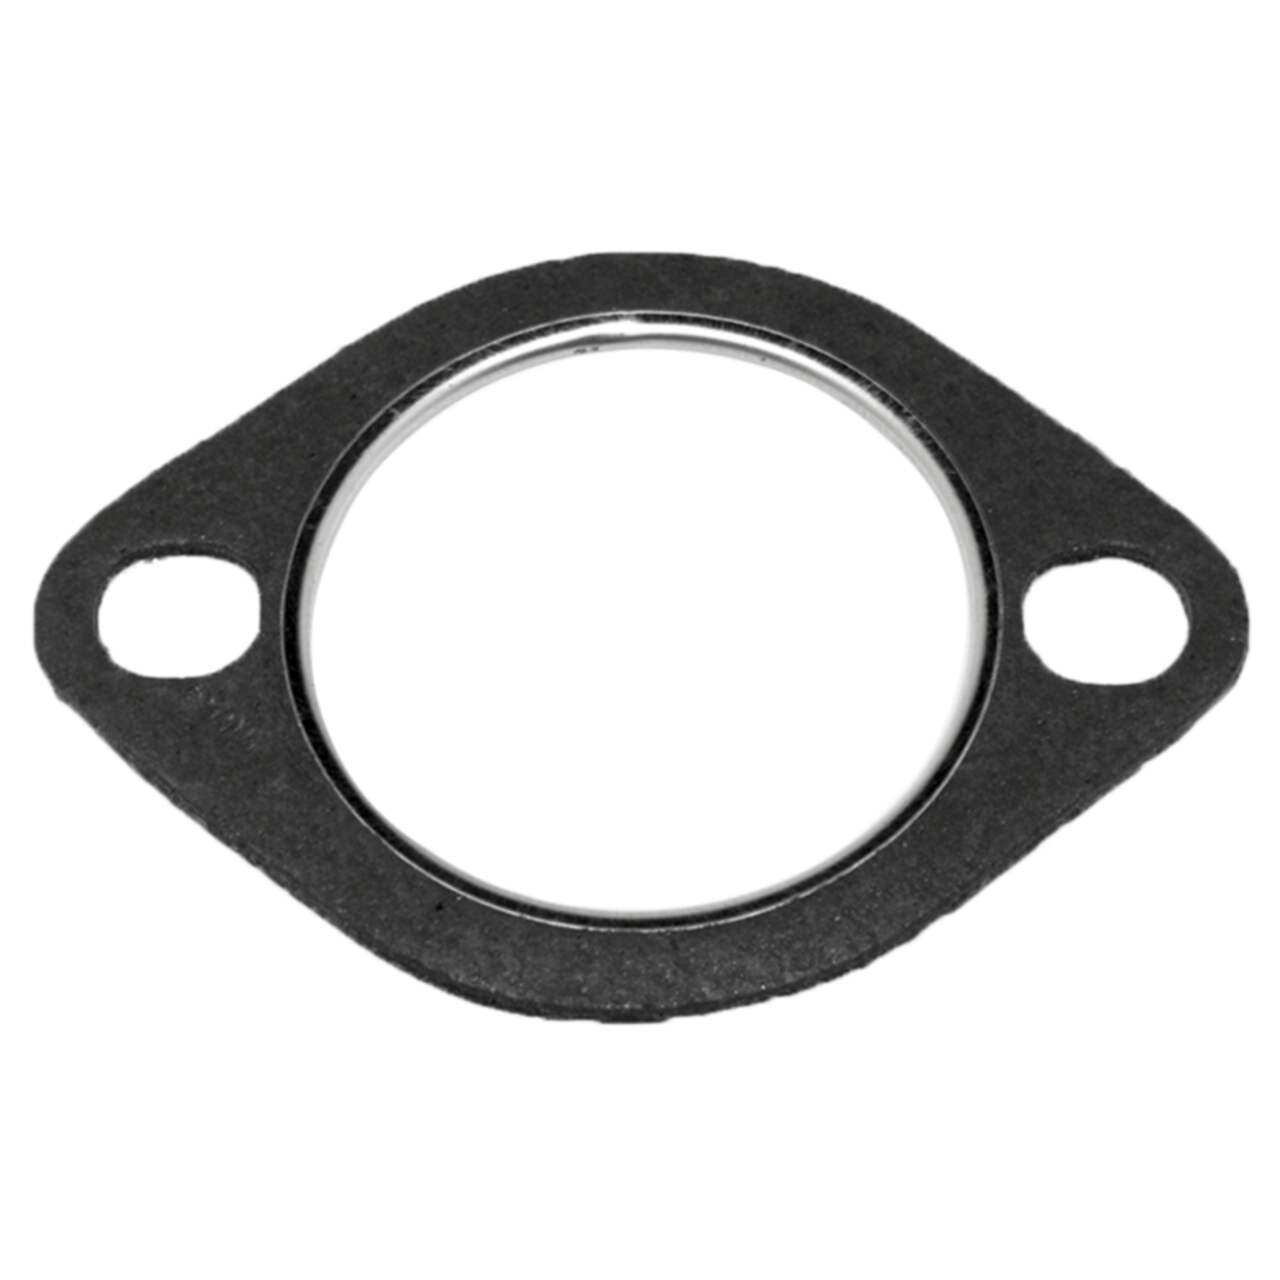 https://media-www.canadiantire.ca/product/automotive/heavy-auto-parts/exhaust/0173210/31735-exhaust-gasket-af4c6eb5-97cc-411c-81bf-ef3d10ba5c86.png?imdensity=1&imwidth=640&impolicy=mZoom